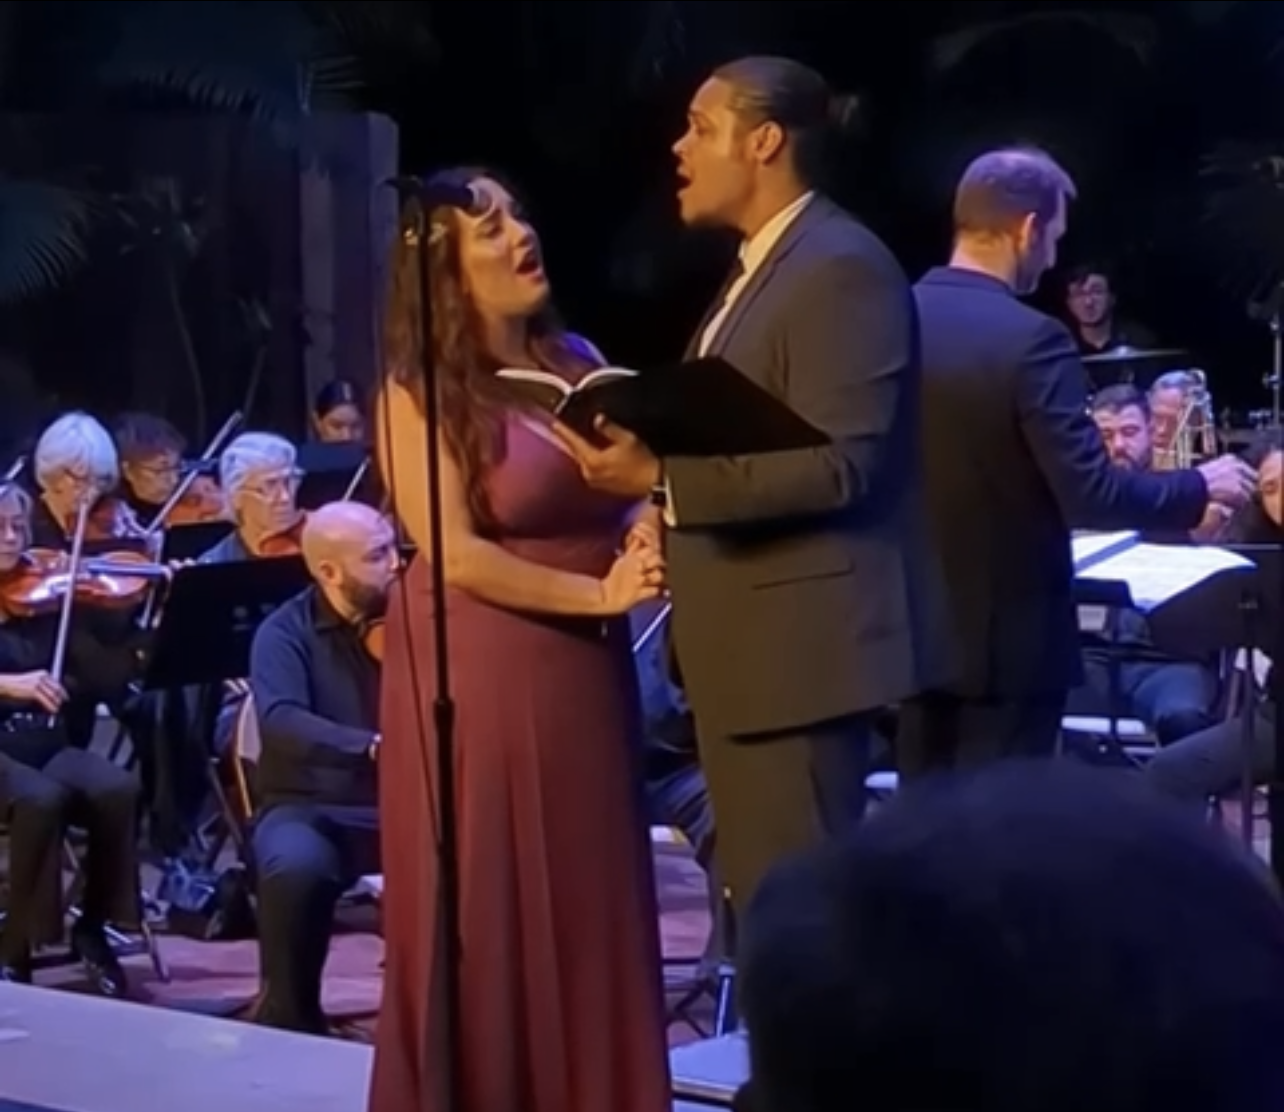 Catherine as Maria in a concert staging of West Side Story, presented by Miami Acting Company and the Alhambra Orchestra at Pinecrest Gardens. Featured: Charles Benitez as Tony; Daniel Andai, conductor.